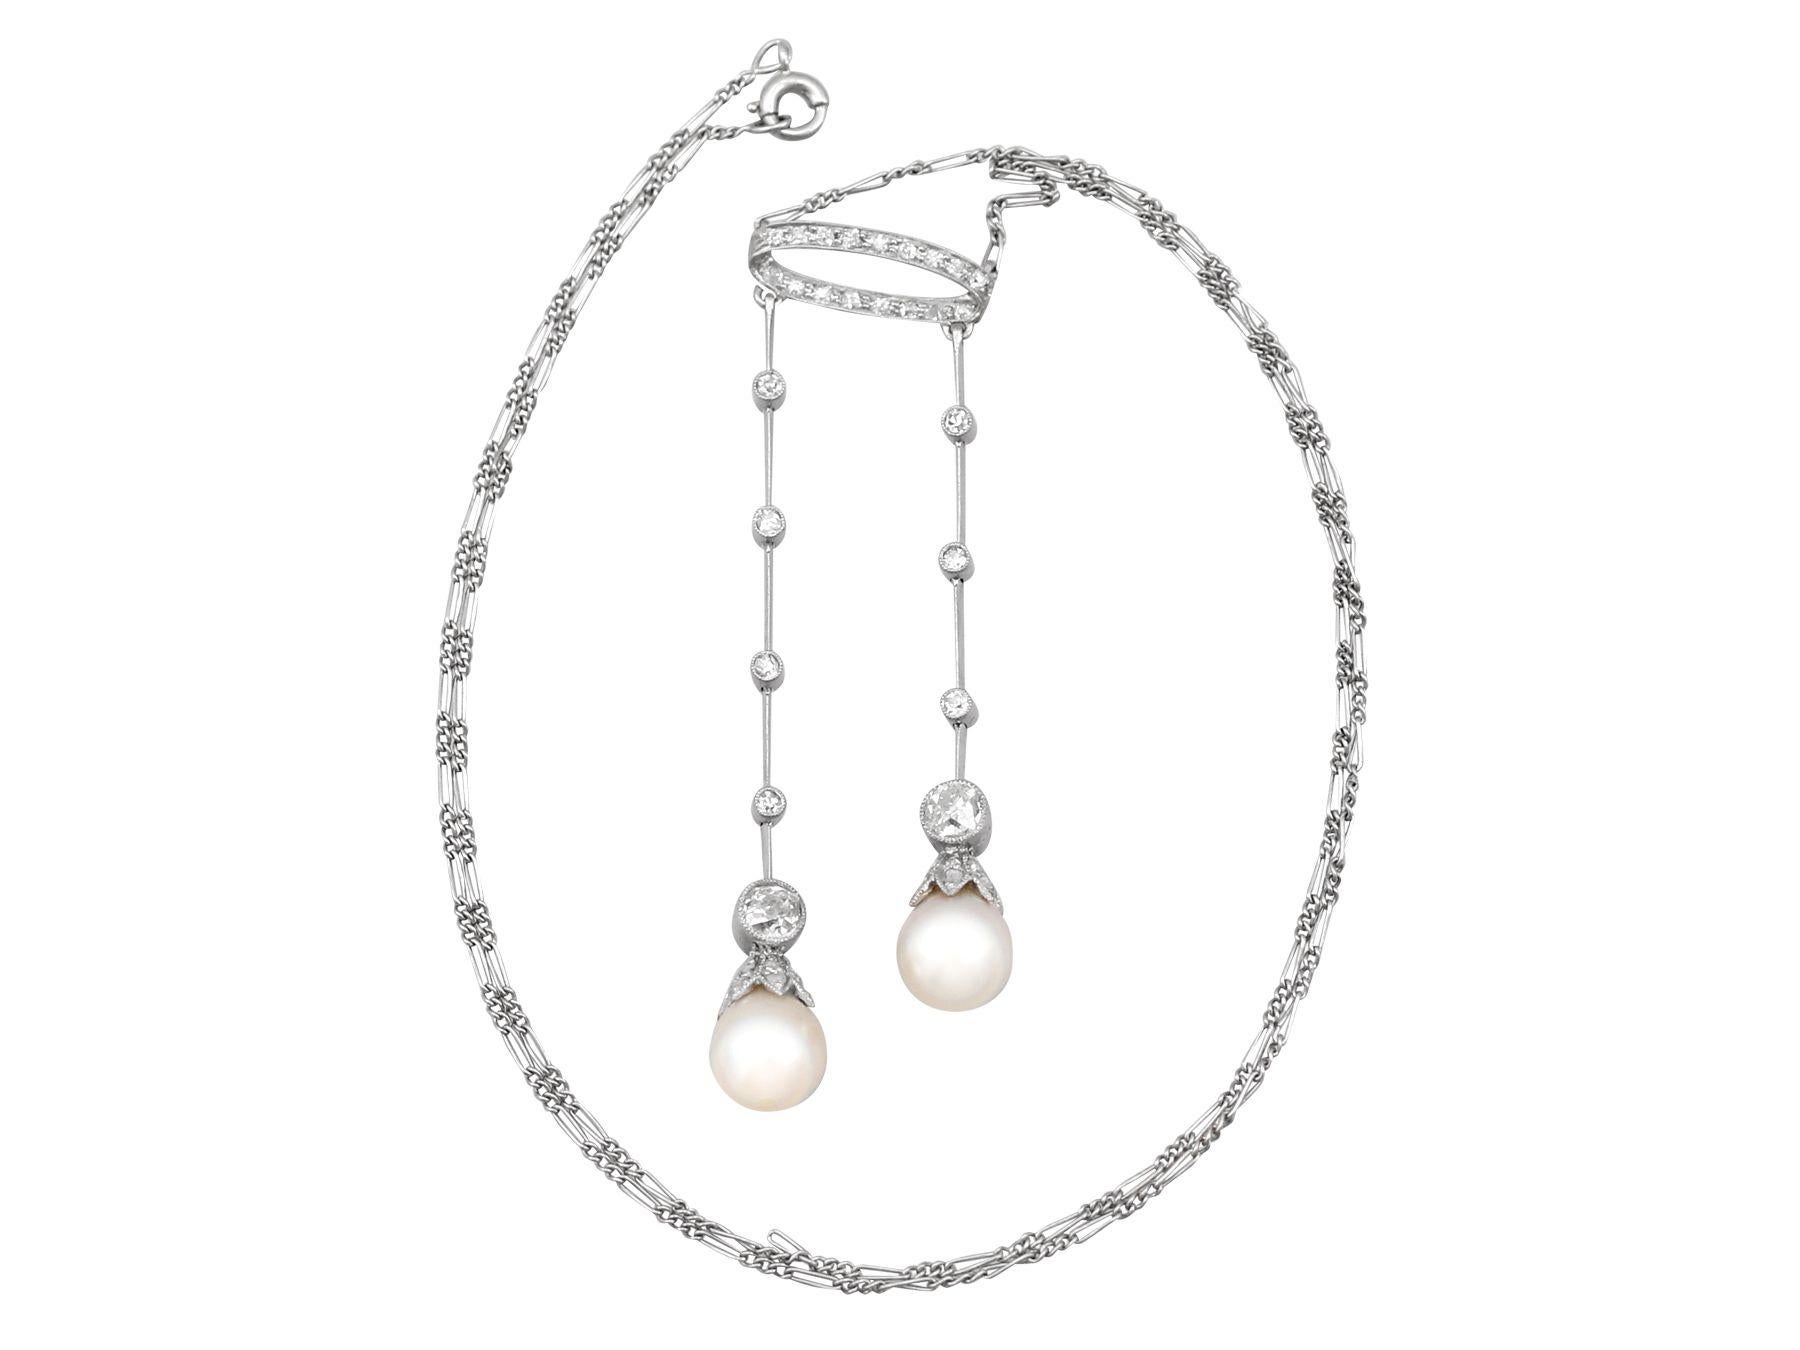 A stunning, fine and impressive antique 1900s 1.10 carat diamond and pearl, platinum drop necklace; part of our diverse antique jewelry and estate jewelry collections.

This stunning, fine and impressive antique pearl necklace has been crafted in